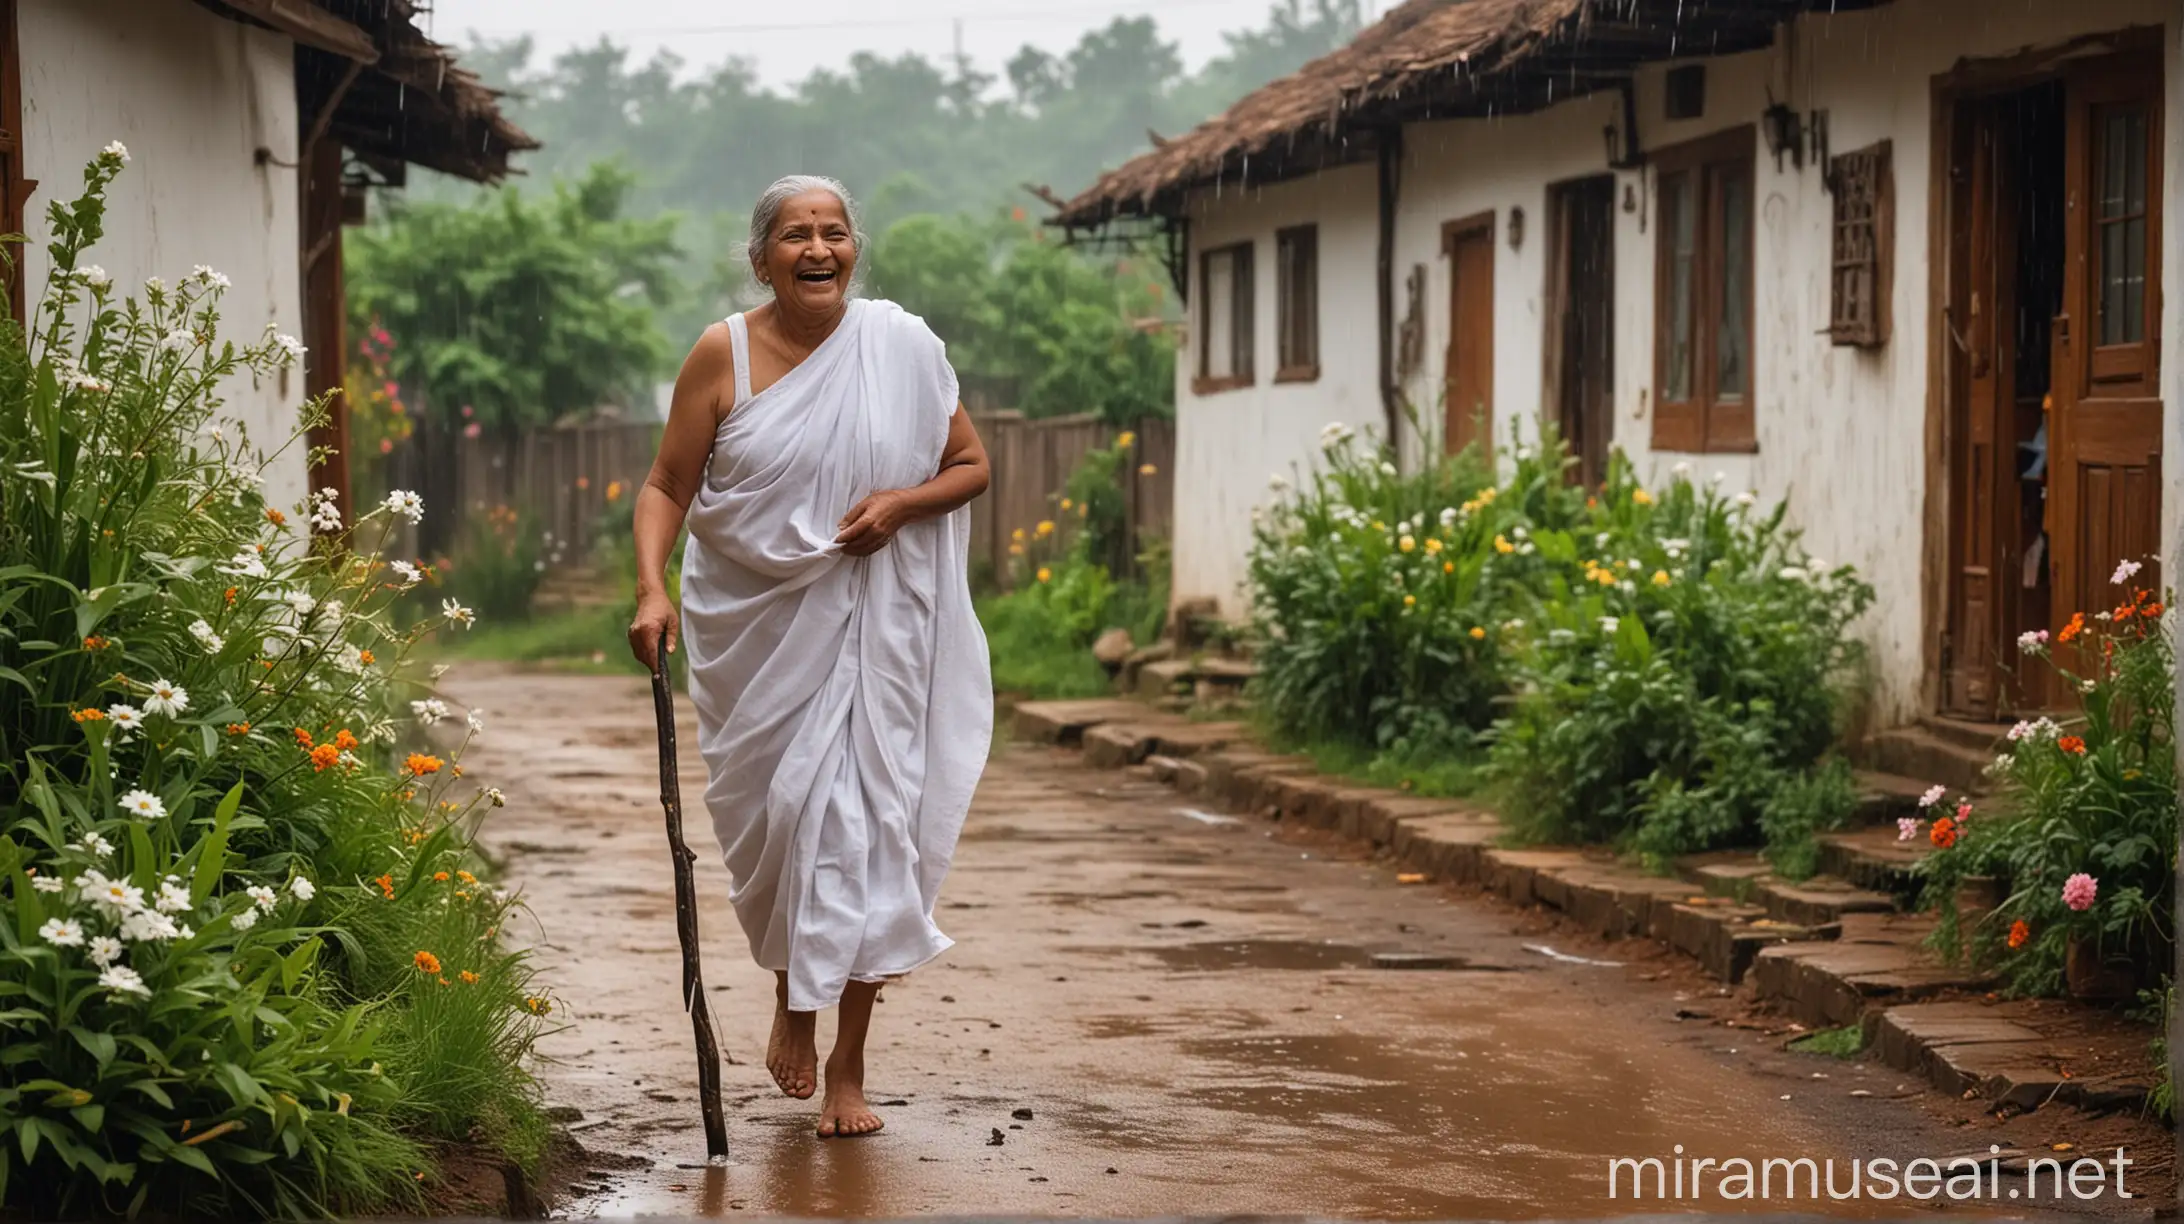 
old desi indian fat age 70 woman walking with a  single stick wearing a white towel she is happy and laughing . she is bending and standing . its evening time and in background there is a old village luxurious house   with flowers and grass and its raining.